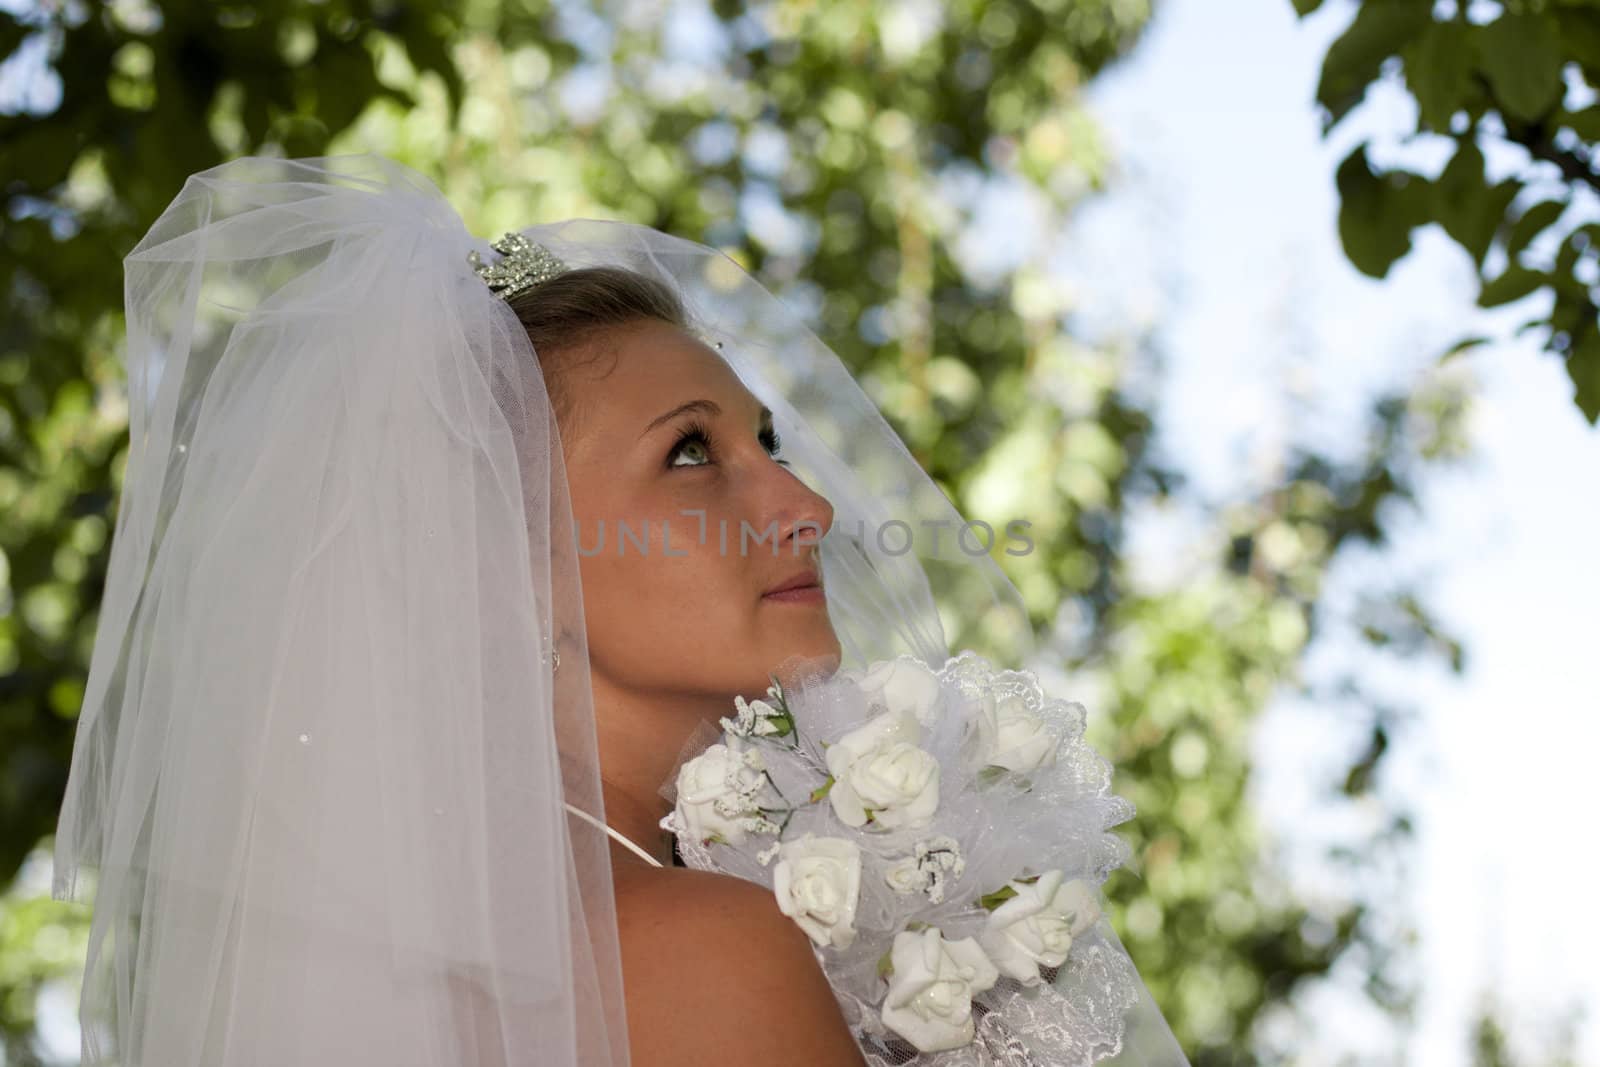 The bride with a bouquet of looking up